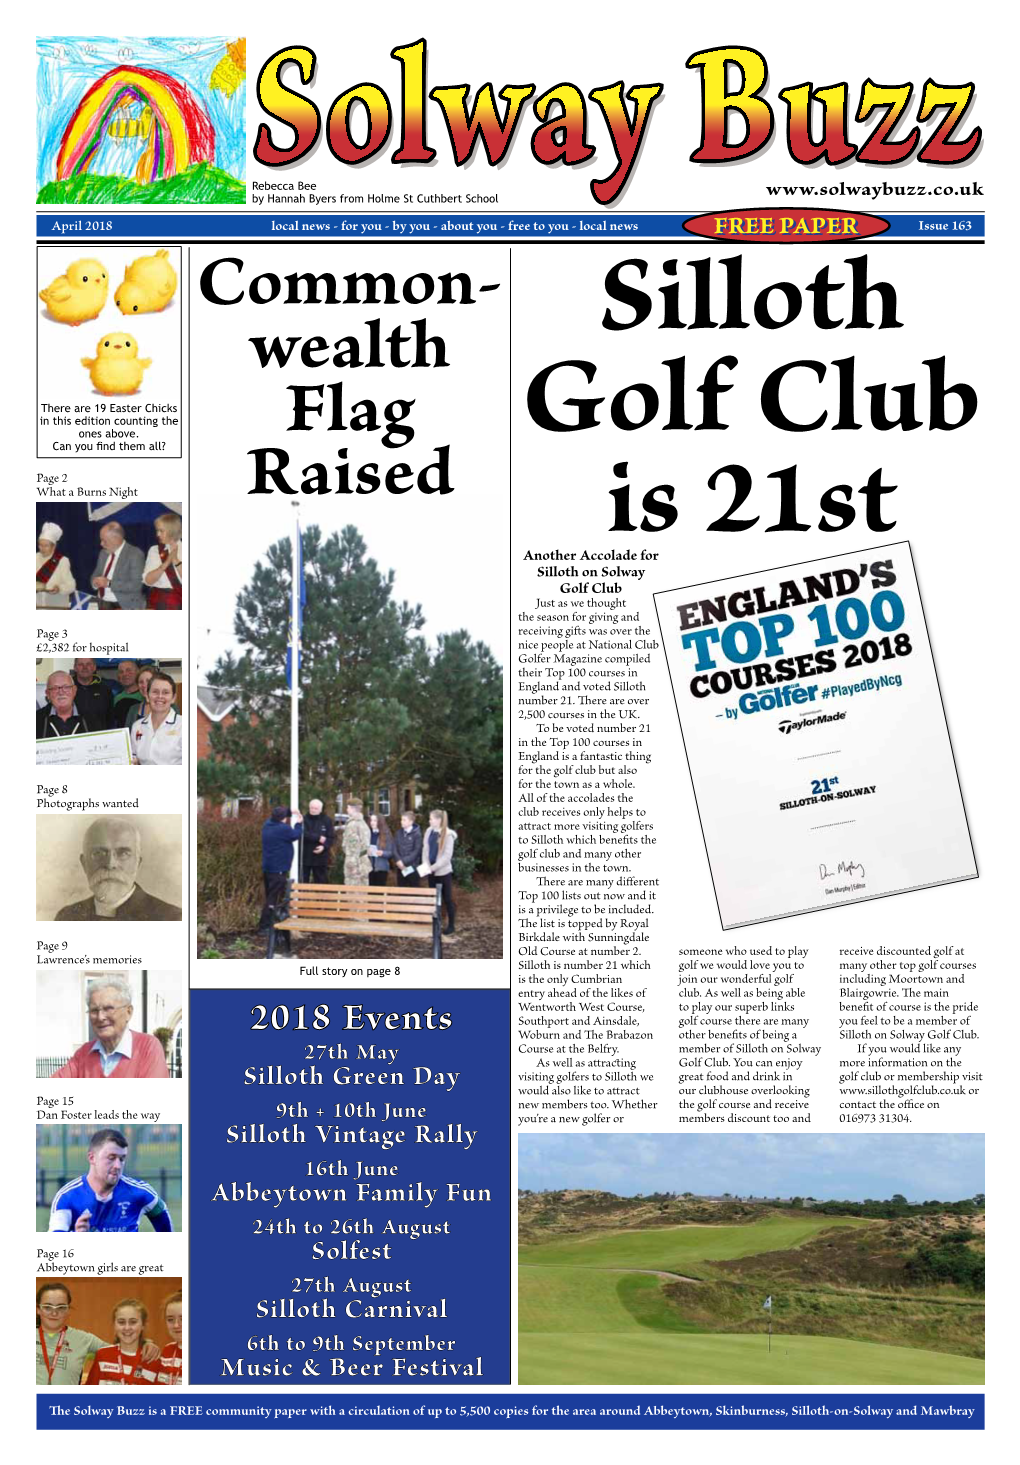 Issue 163 Common- Wealth Silloth There Are 19 Easter Chicks in This Edition Counting the Ones Above